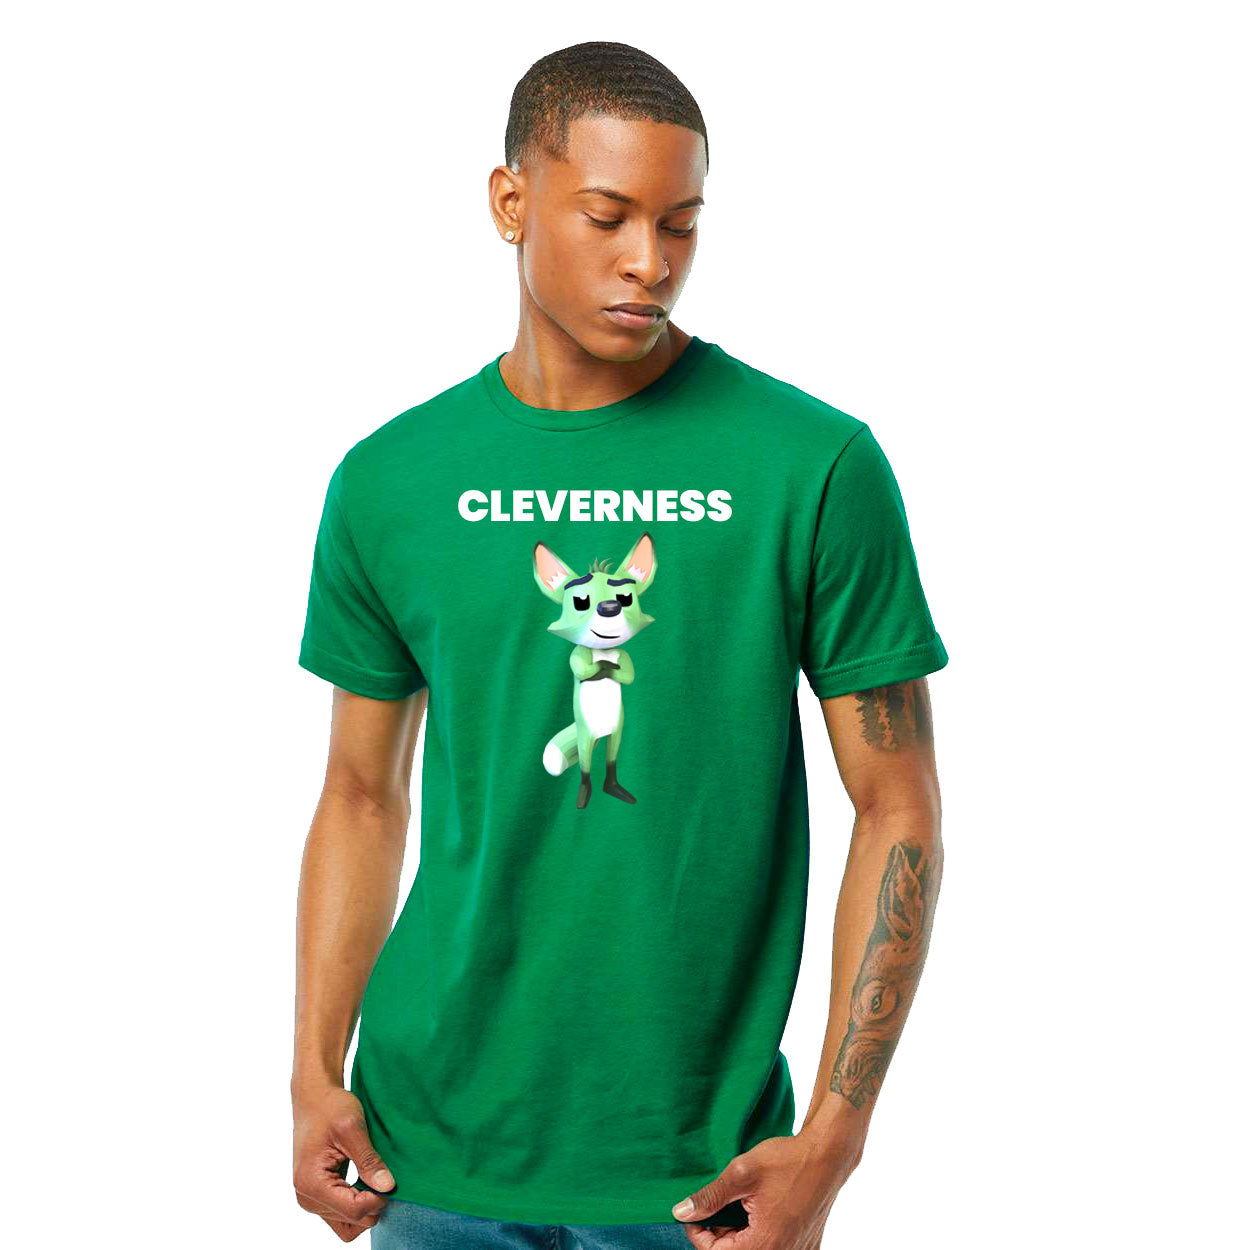 STRIDERS CLEVERNESS CLASSIC T-SHIRT